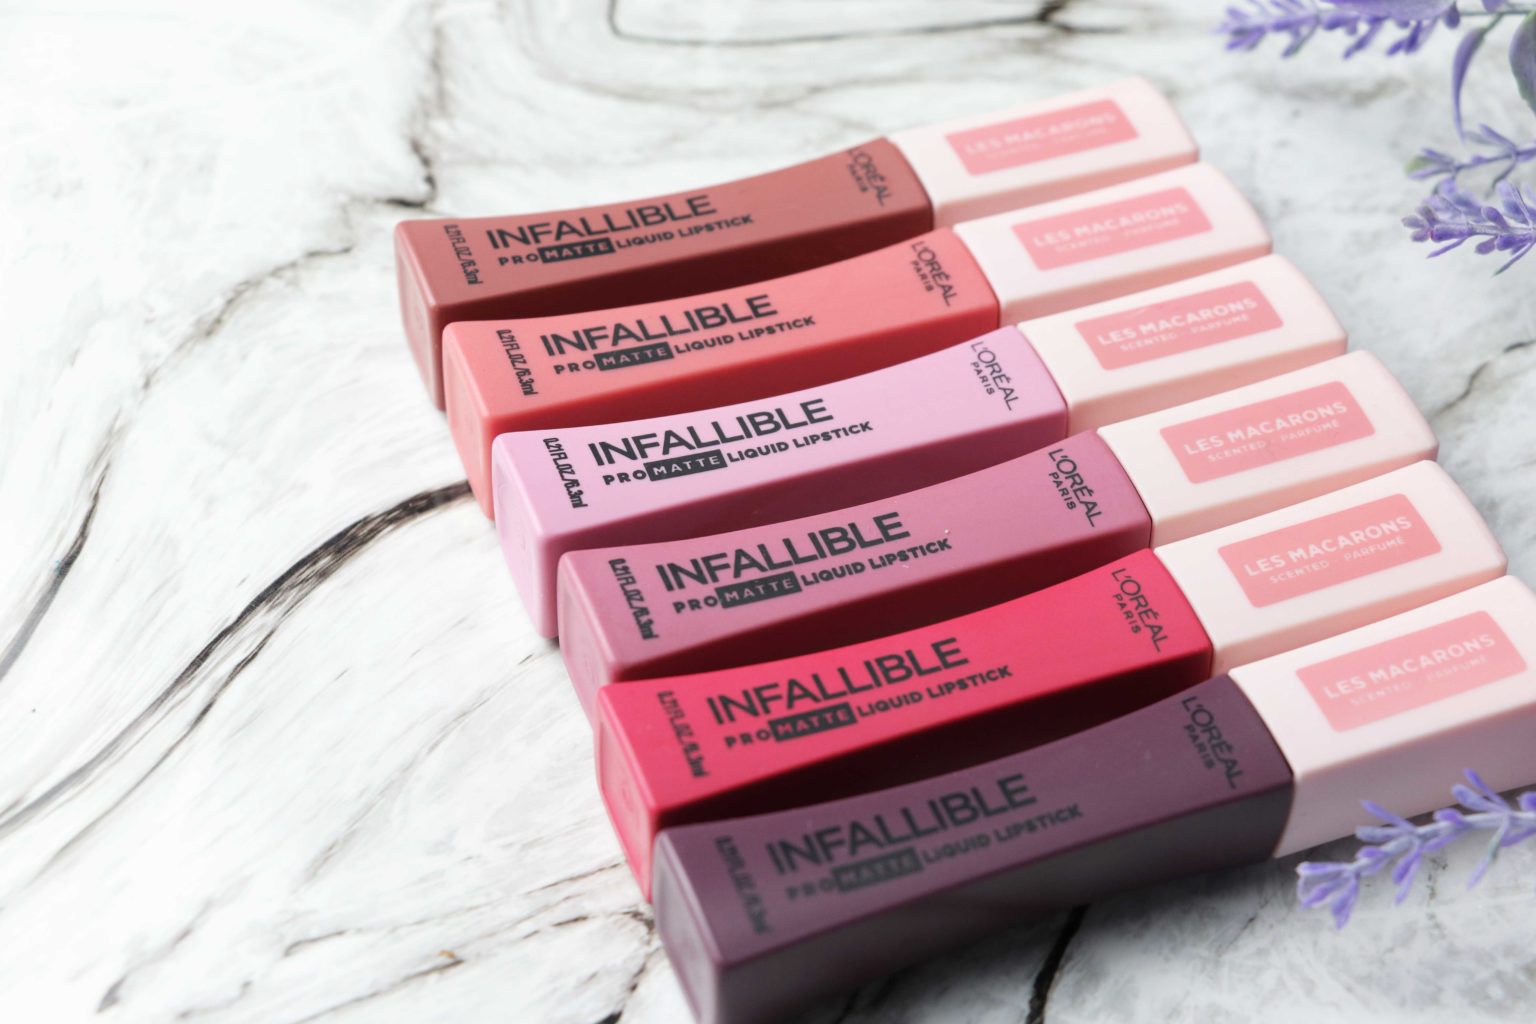 L’Oreal Les Macarons Lipstick Swatches.